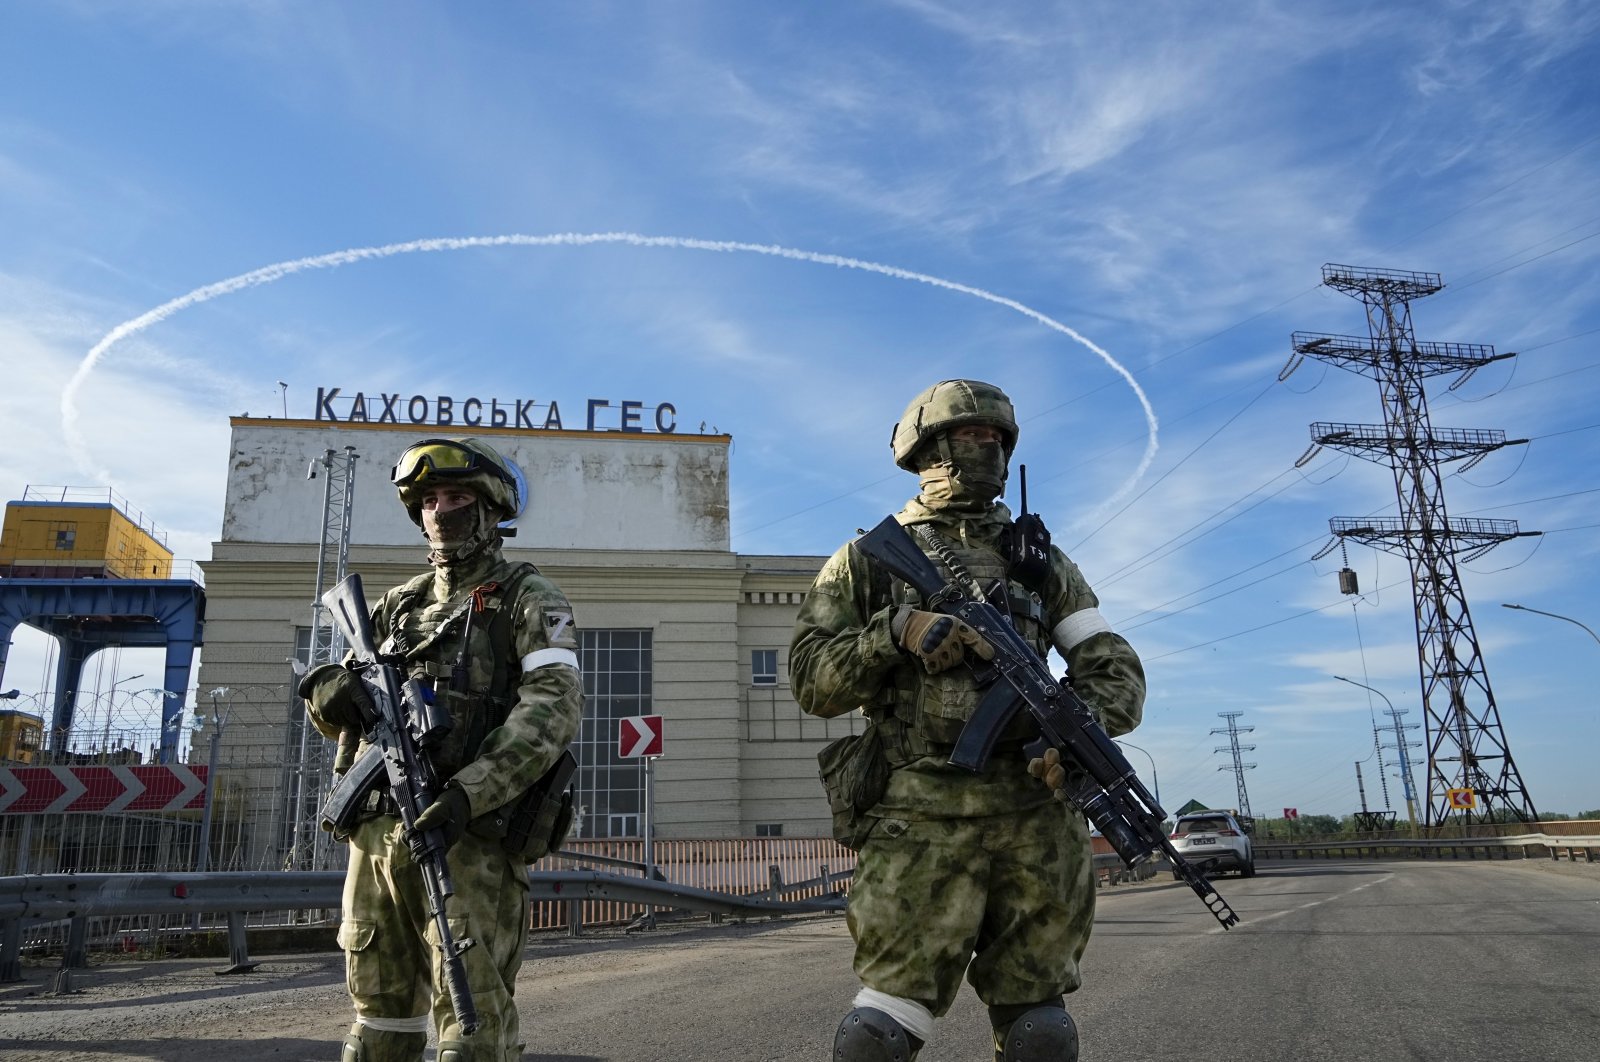 Russian troops guard an entrance of the Kakhovka Hydroelectric Station, a run-of-river power plant on the Dnieper River in the Kherson region, southern Ukraine, May 20, 2022. (AP Photo)